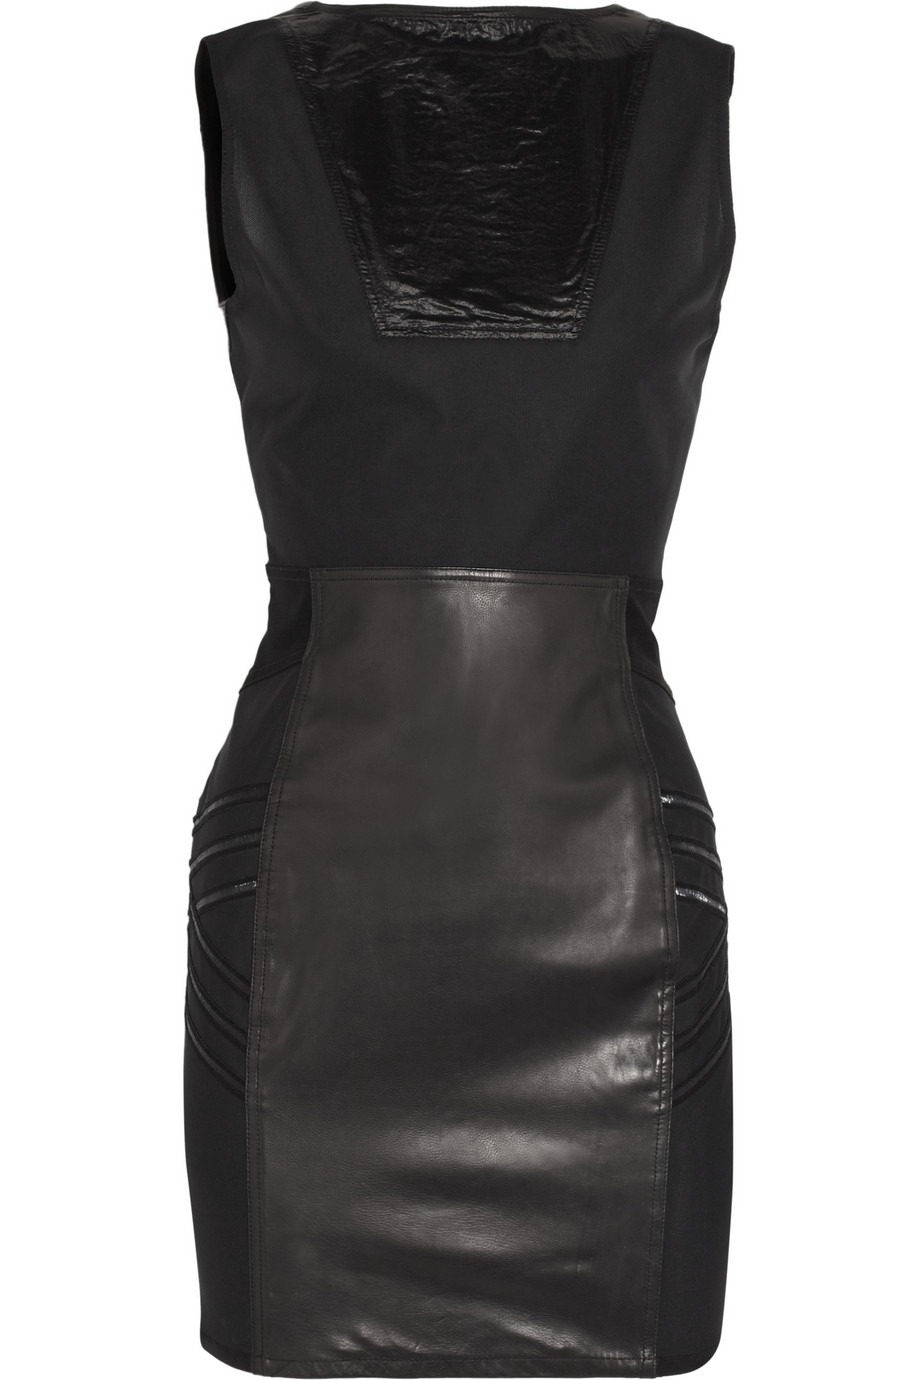 Alexander Wang Leather and Mesh Dress in Black - Lyst